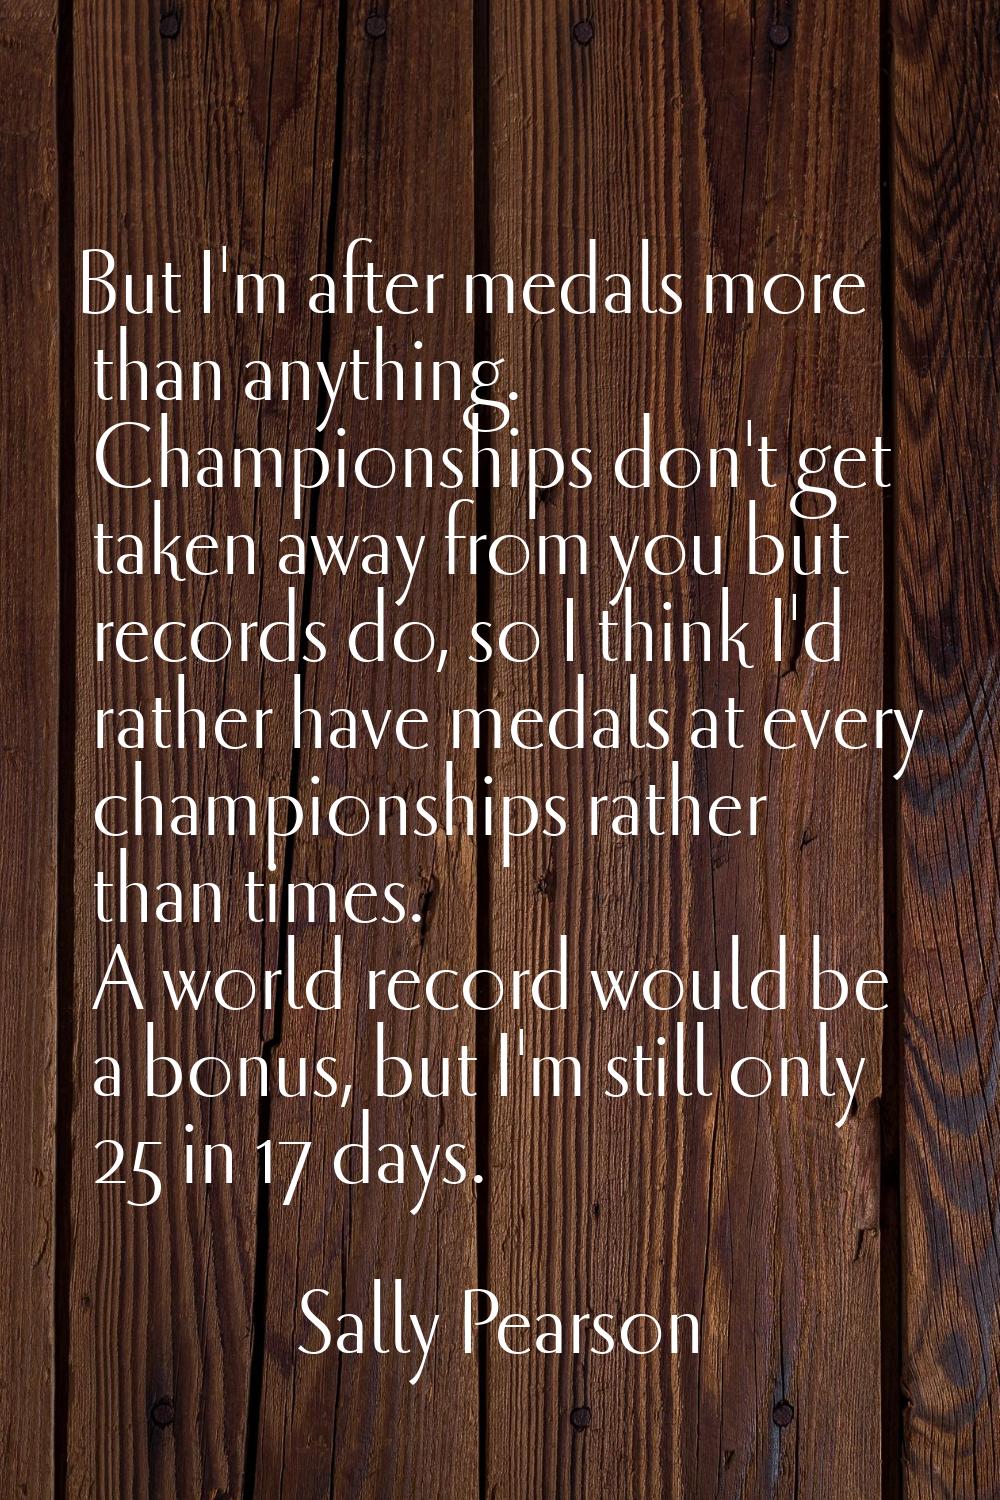 But I'm after medals more than anything. Championships don't get taken away from you but records do